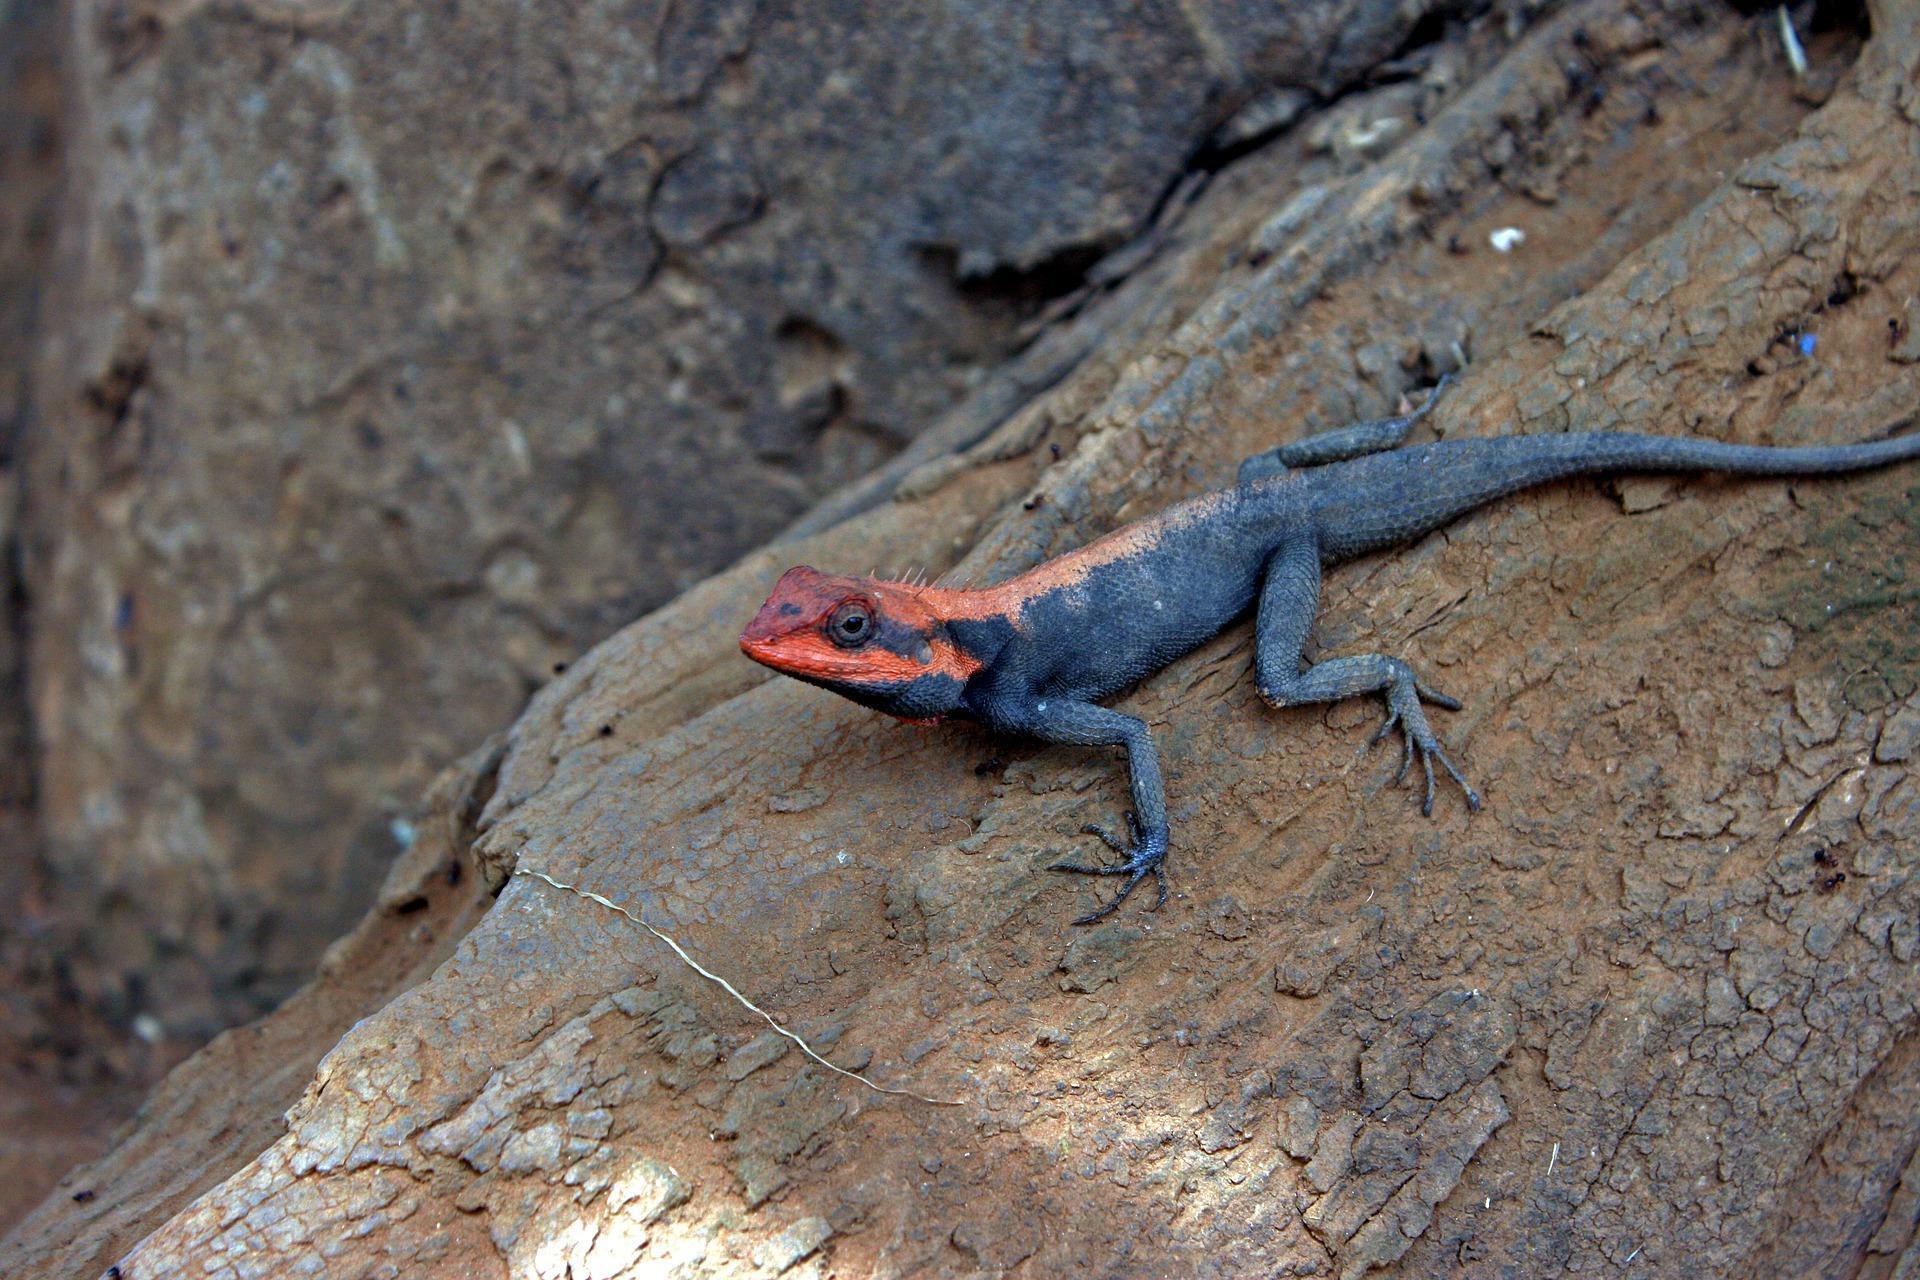 Agama lizard Wallpaper HD for Android